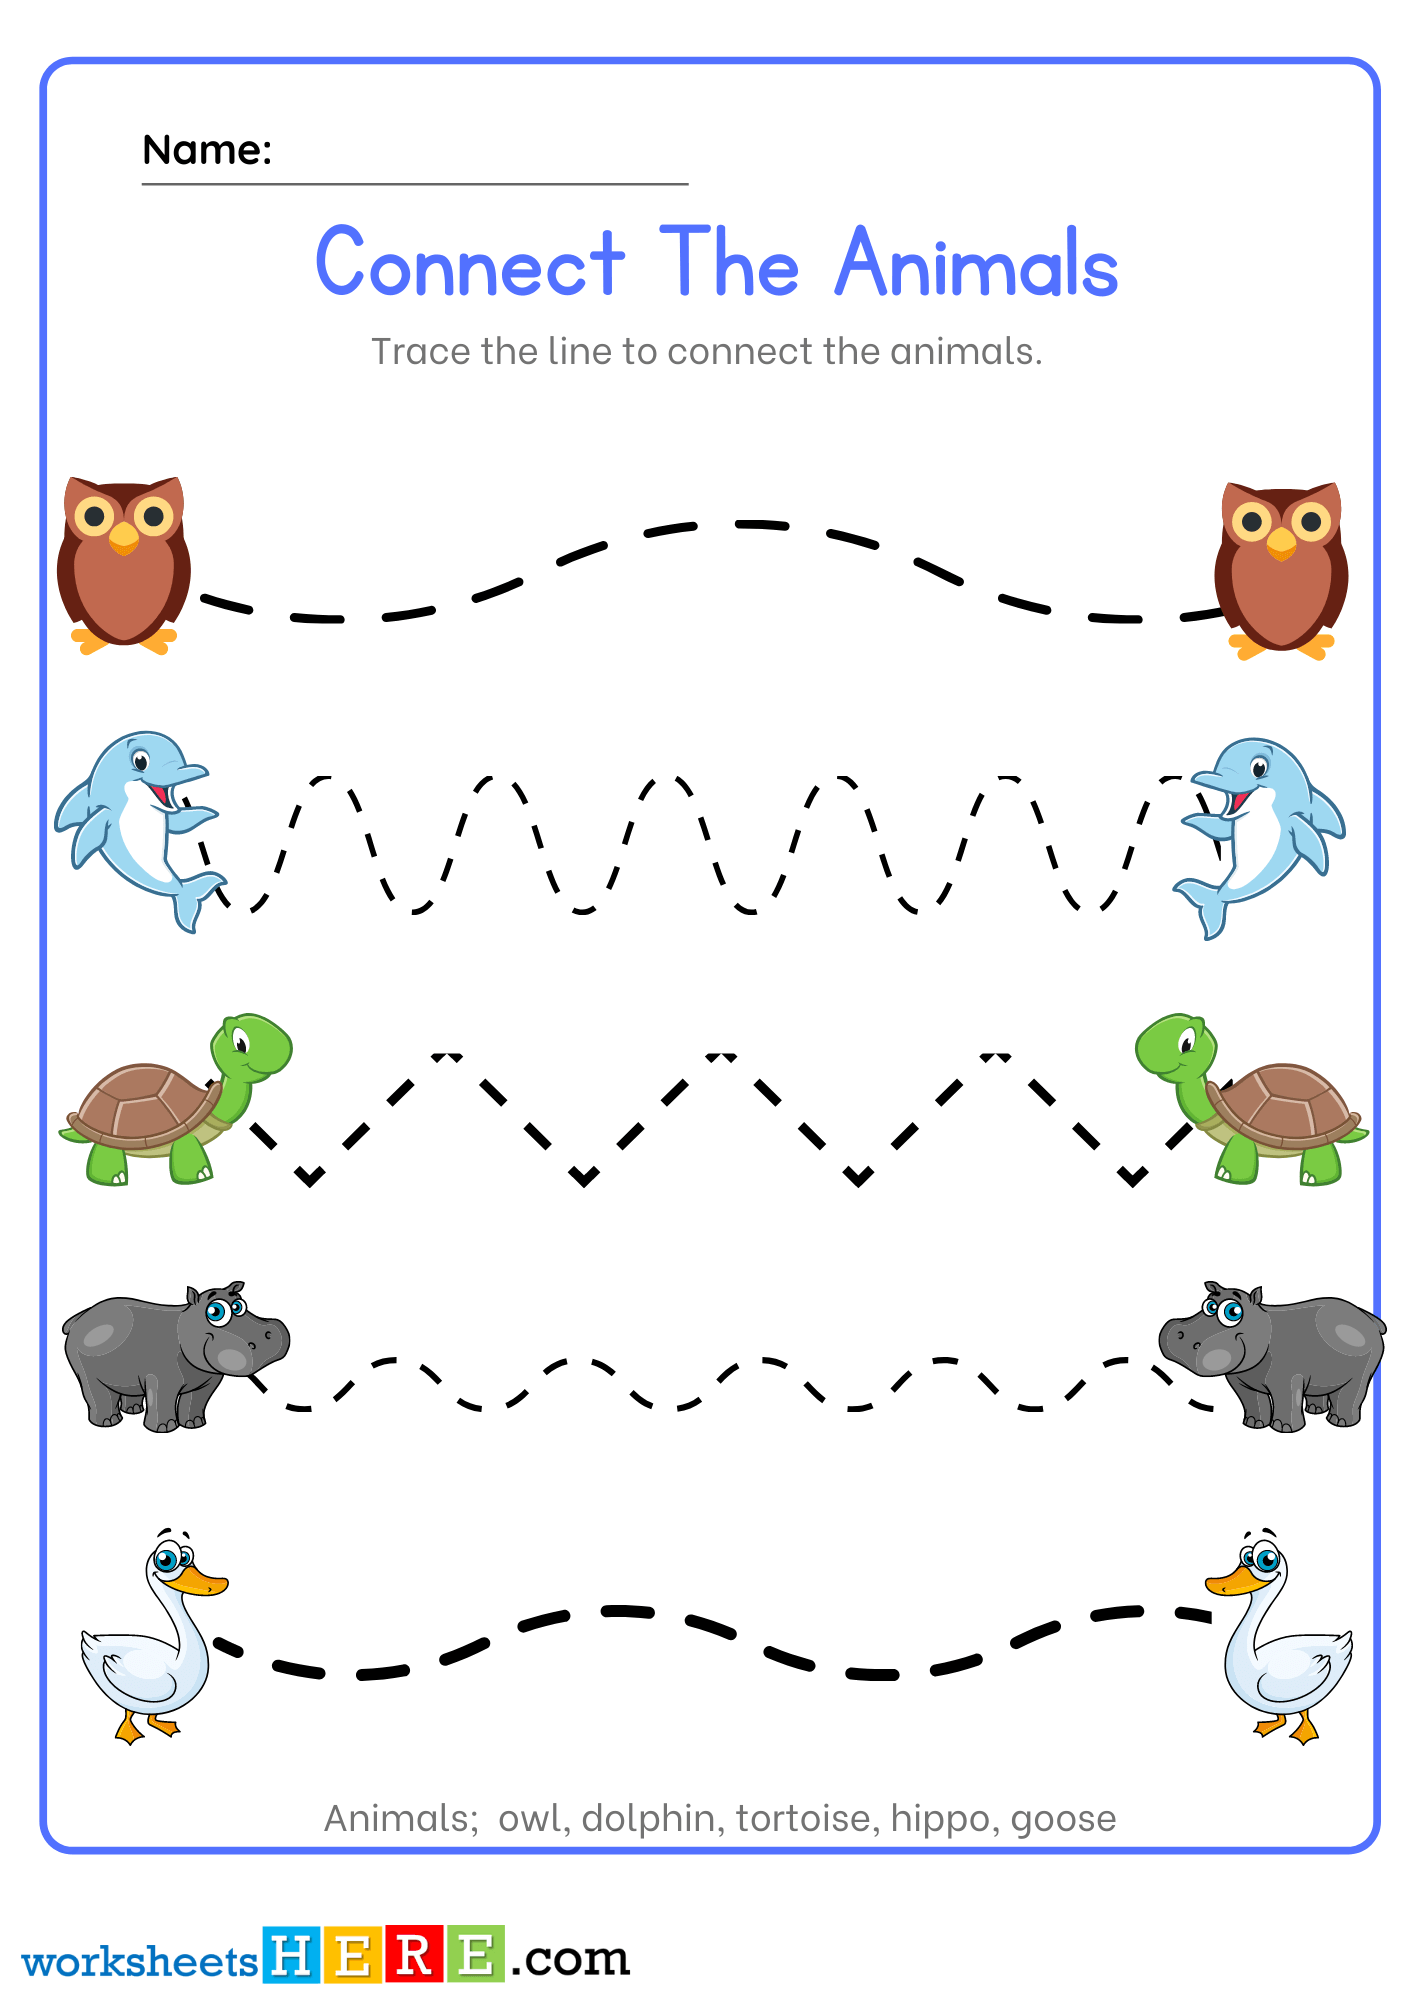 Connect The Animals, Tracing Lines PDF Worksheets For Kindergarten